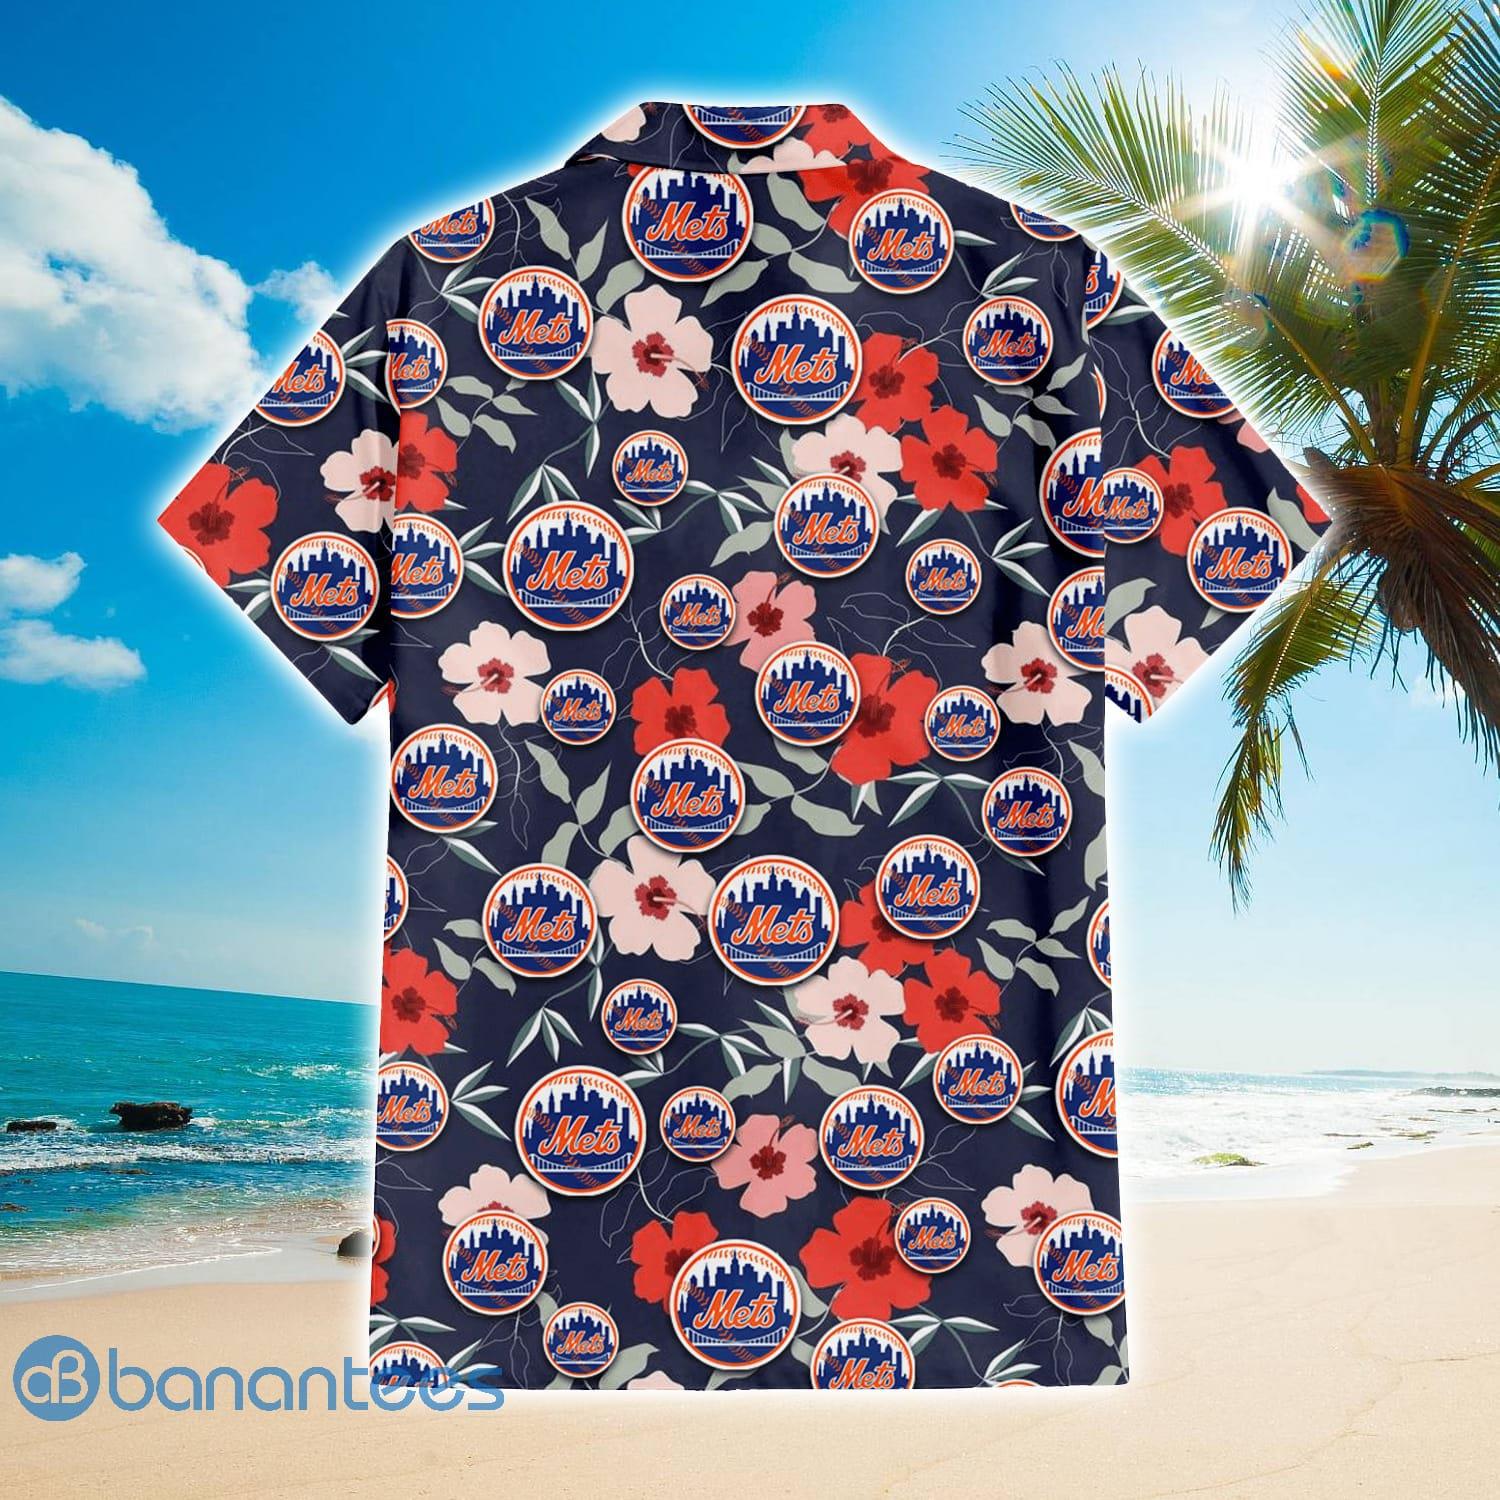 New York Mets Logo And Red Pink White Hibiscus 3D Hawaiian Shirt